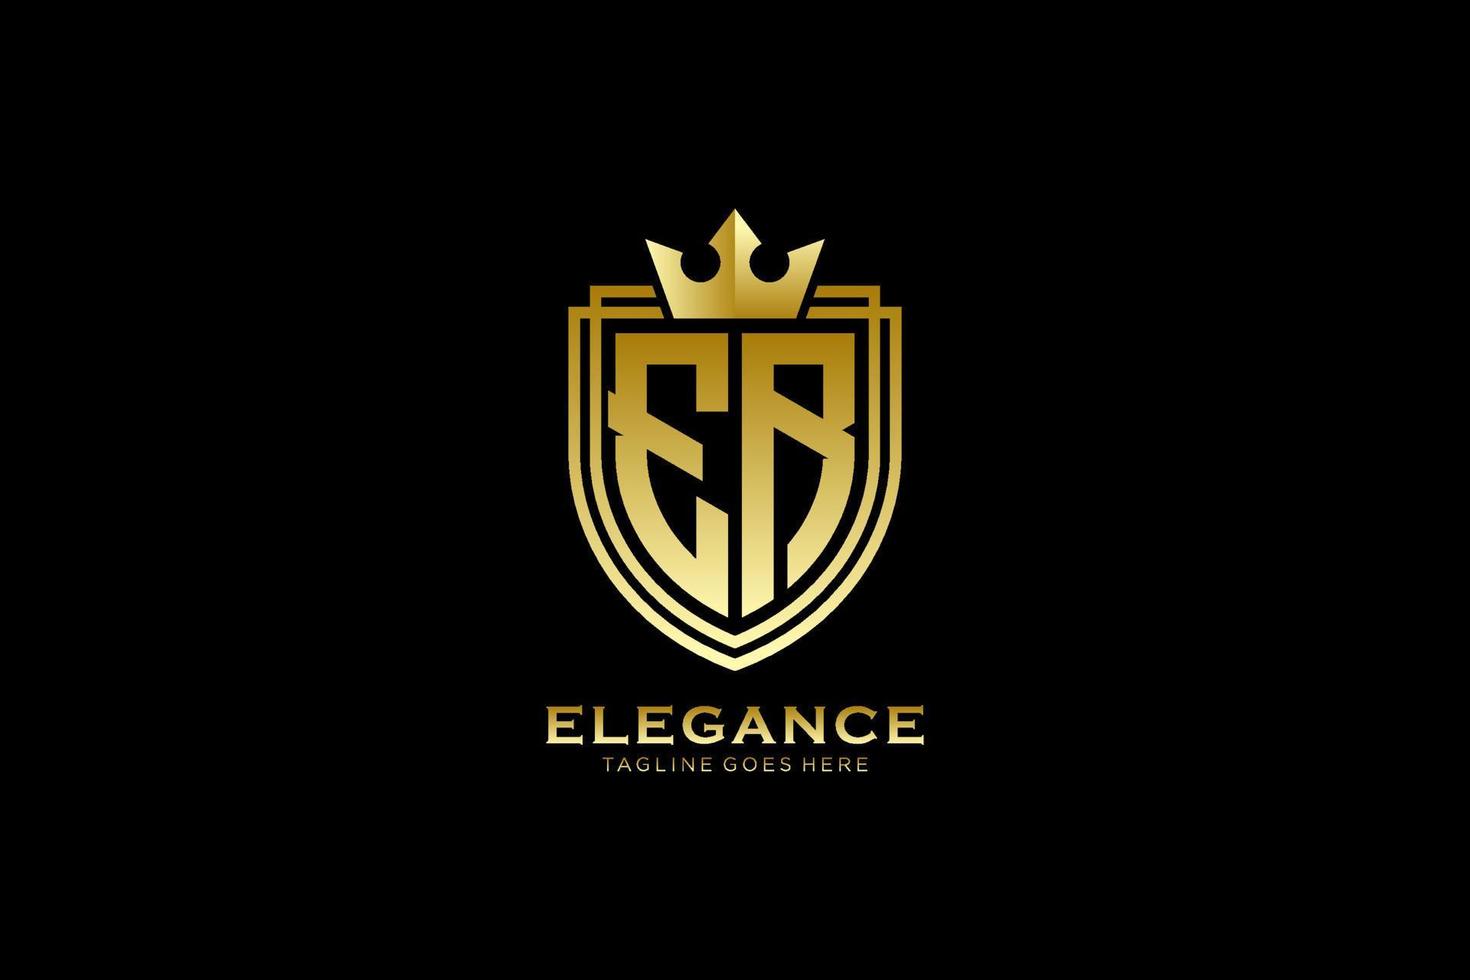 initial ER elegant luxury monogram logo or badge template with scrolls and royal crown - perfect for luxurious branding projects vector